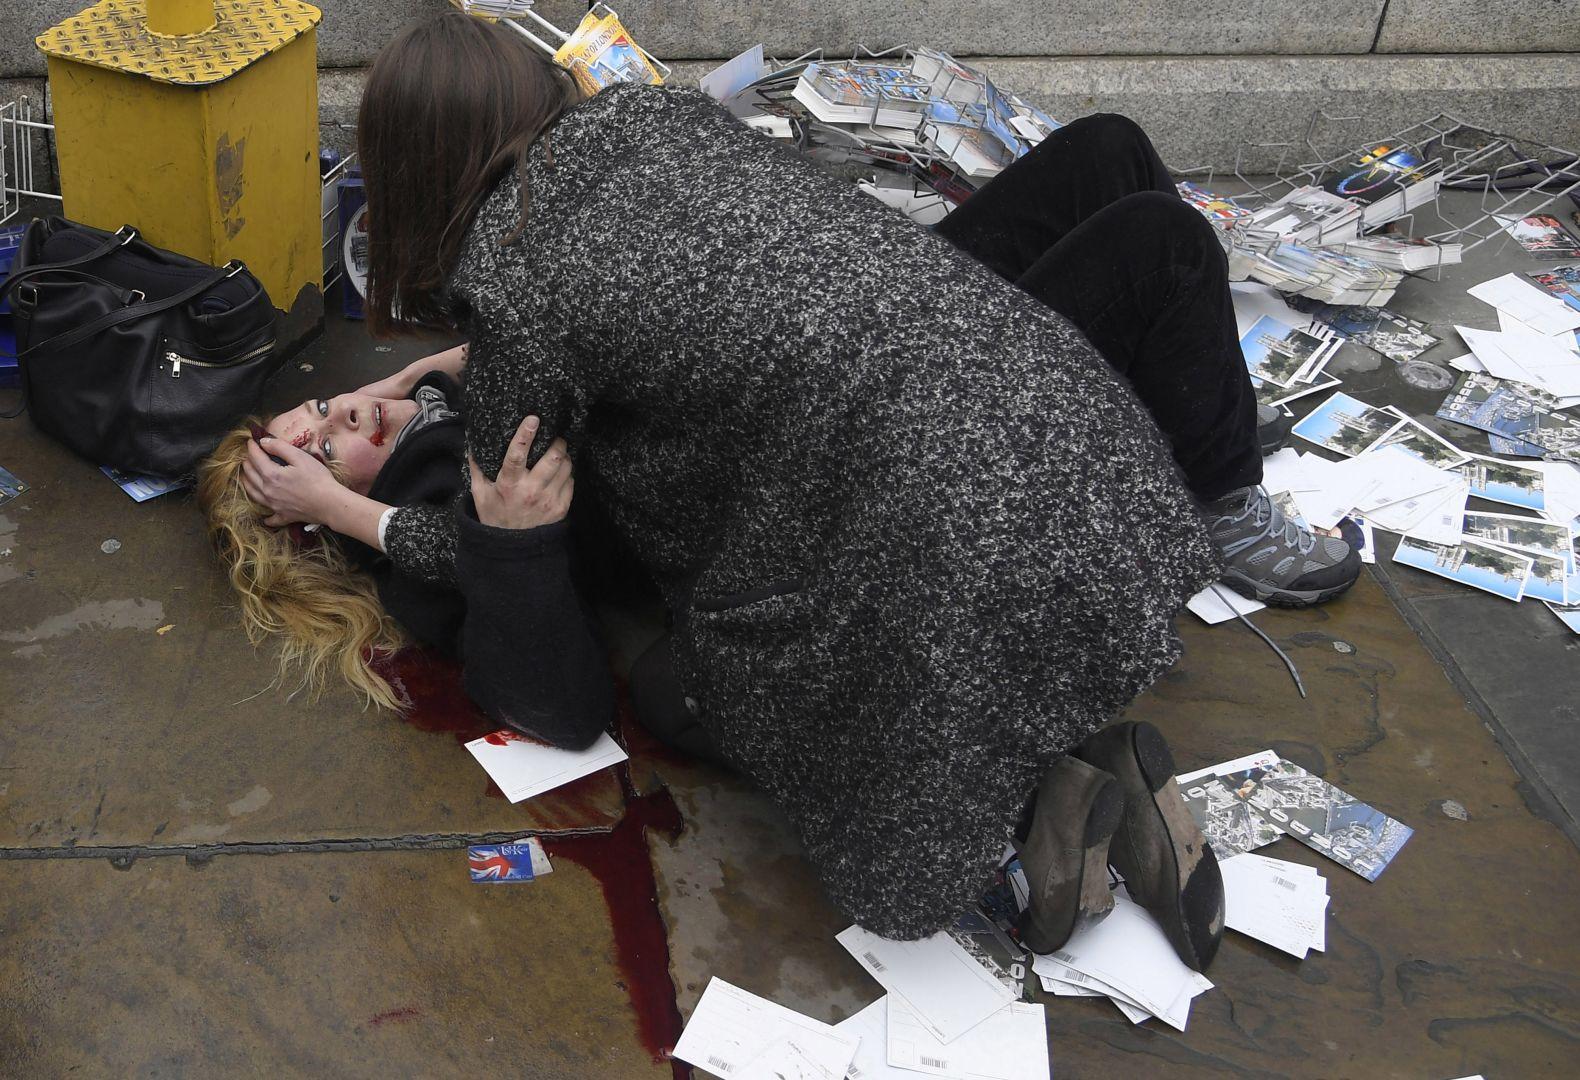 Witnessing the immediate aftermath of an attack in the heart of London, © Toby Melville, United Kingdom, 2nd prize stories, World Press Photo Contest